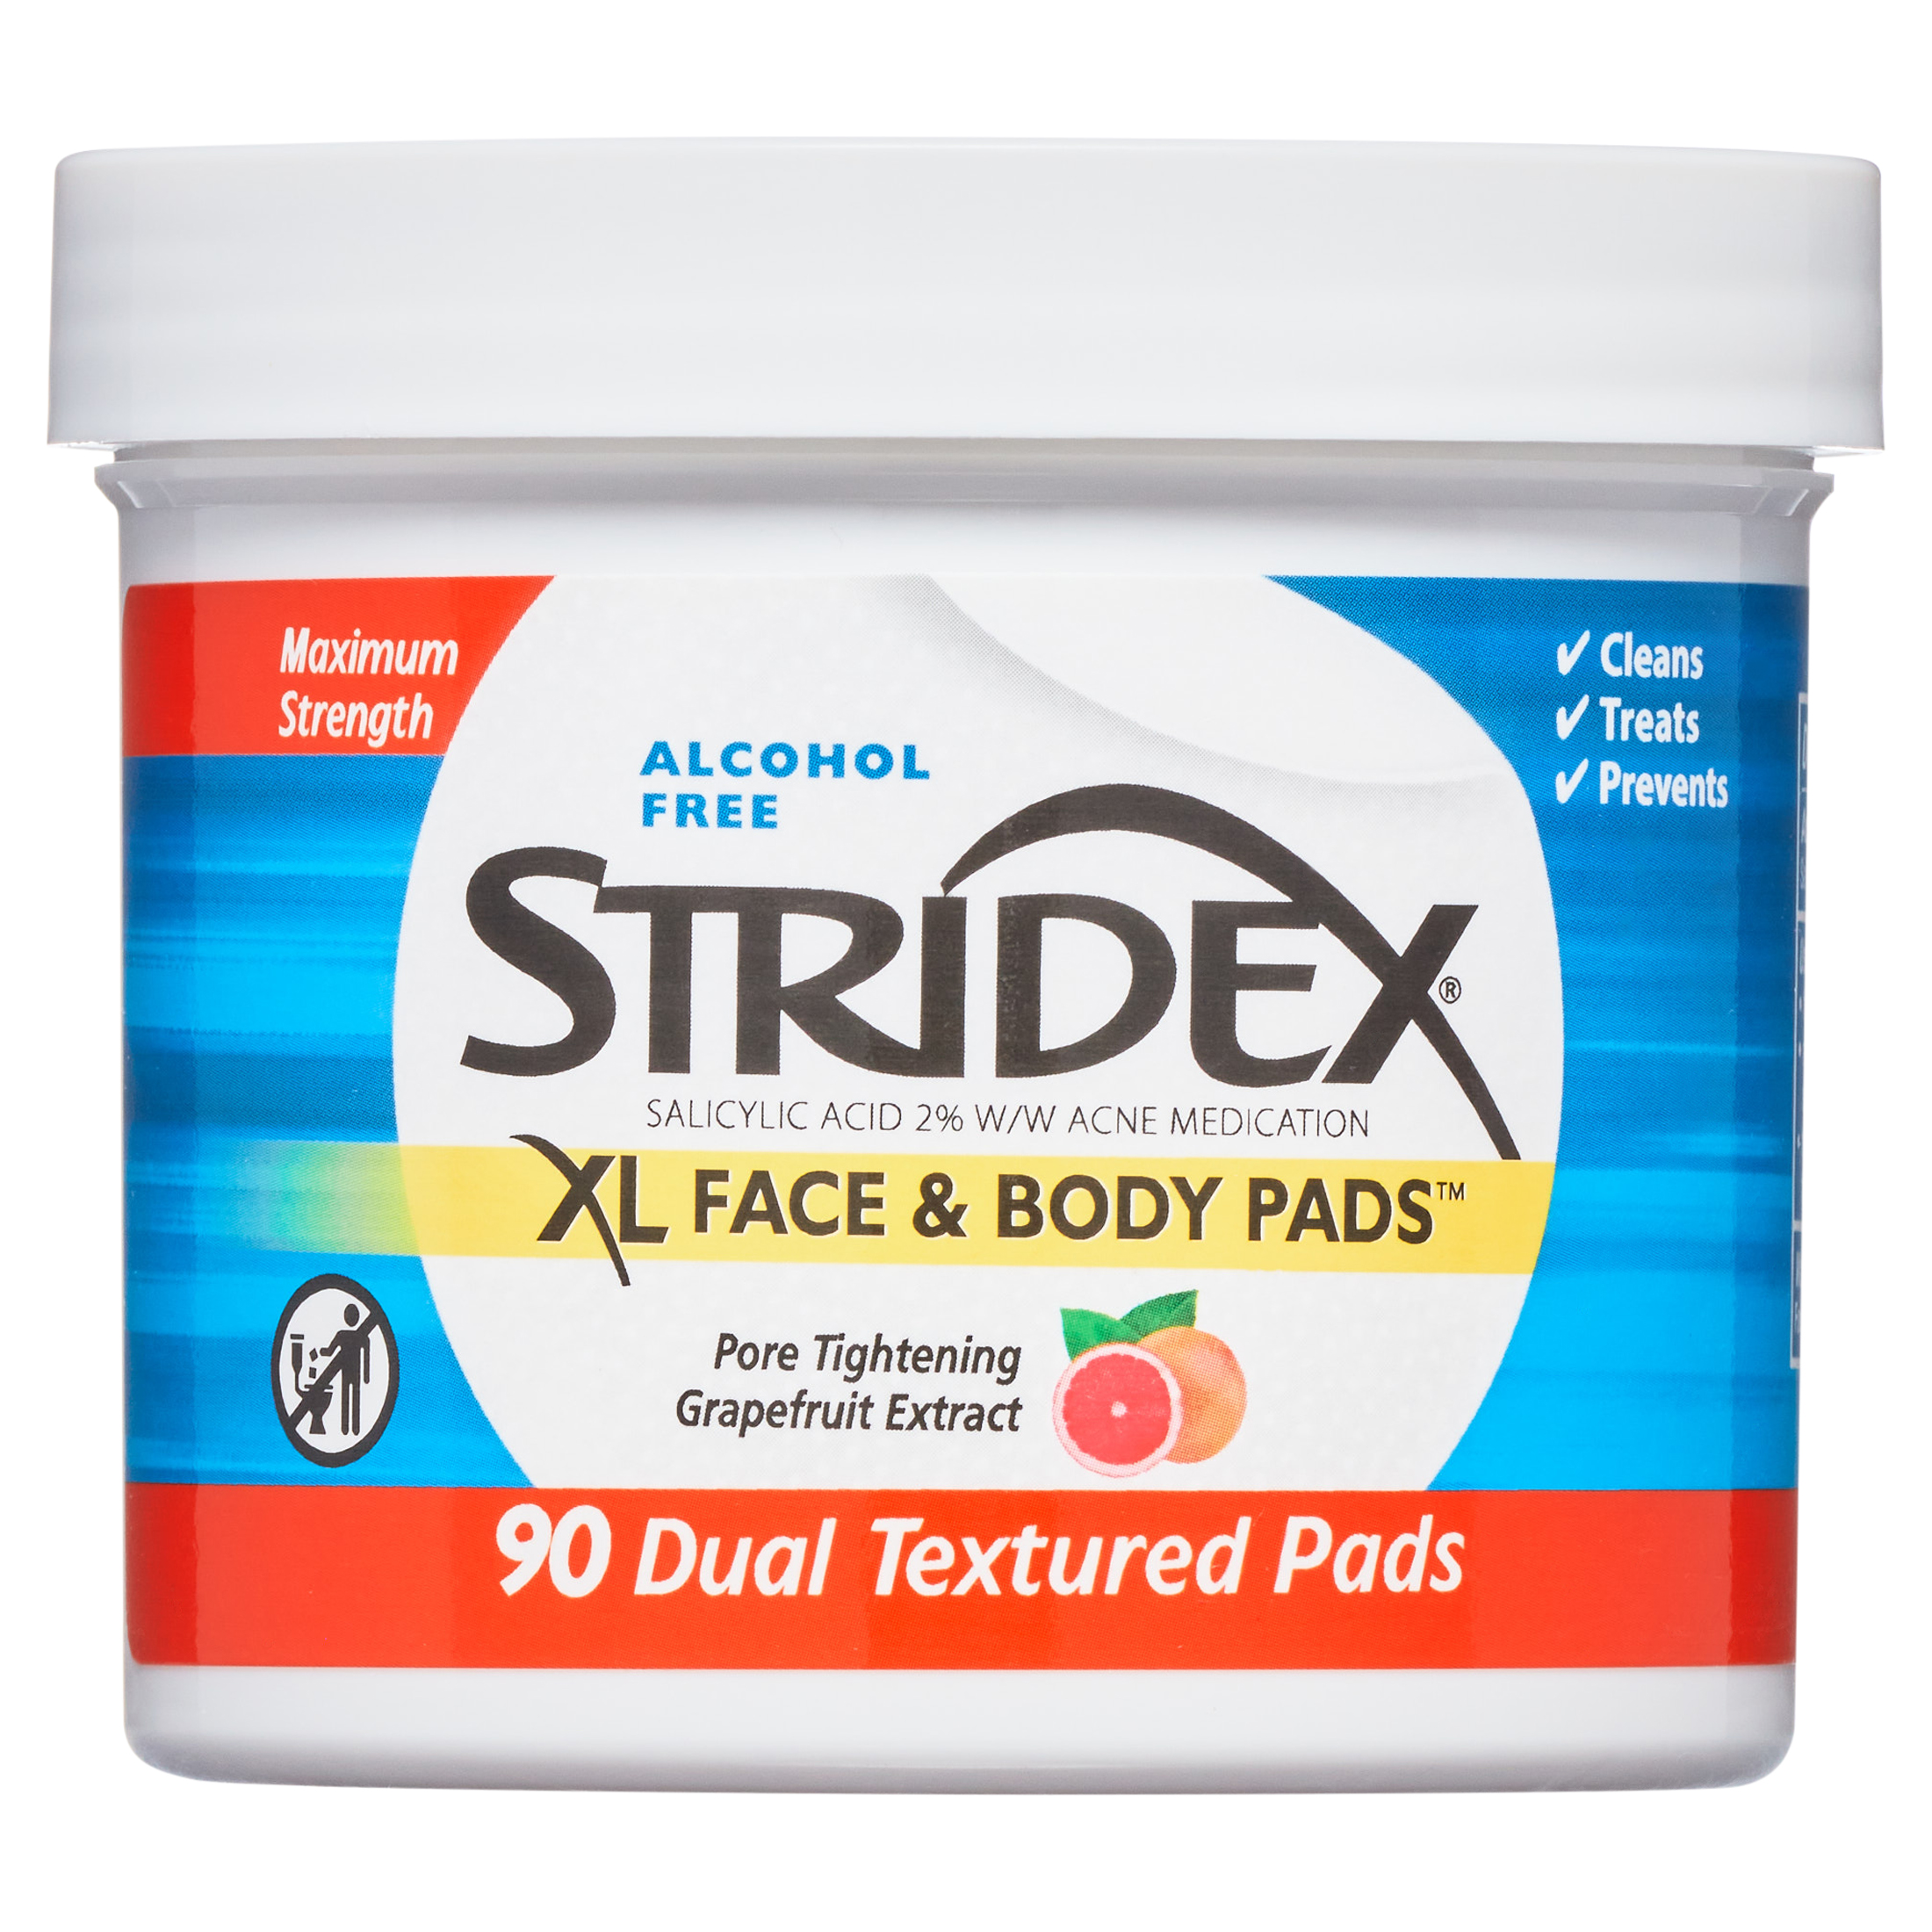 Stridex XL Acne Pads for Face and Body with Salicylic Acid, Alcohol Free, 90 Ct - image 3 of 12